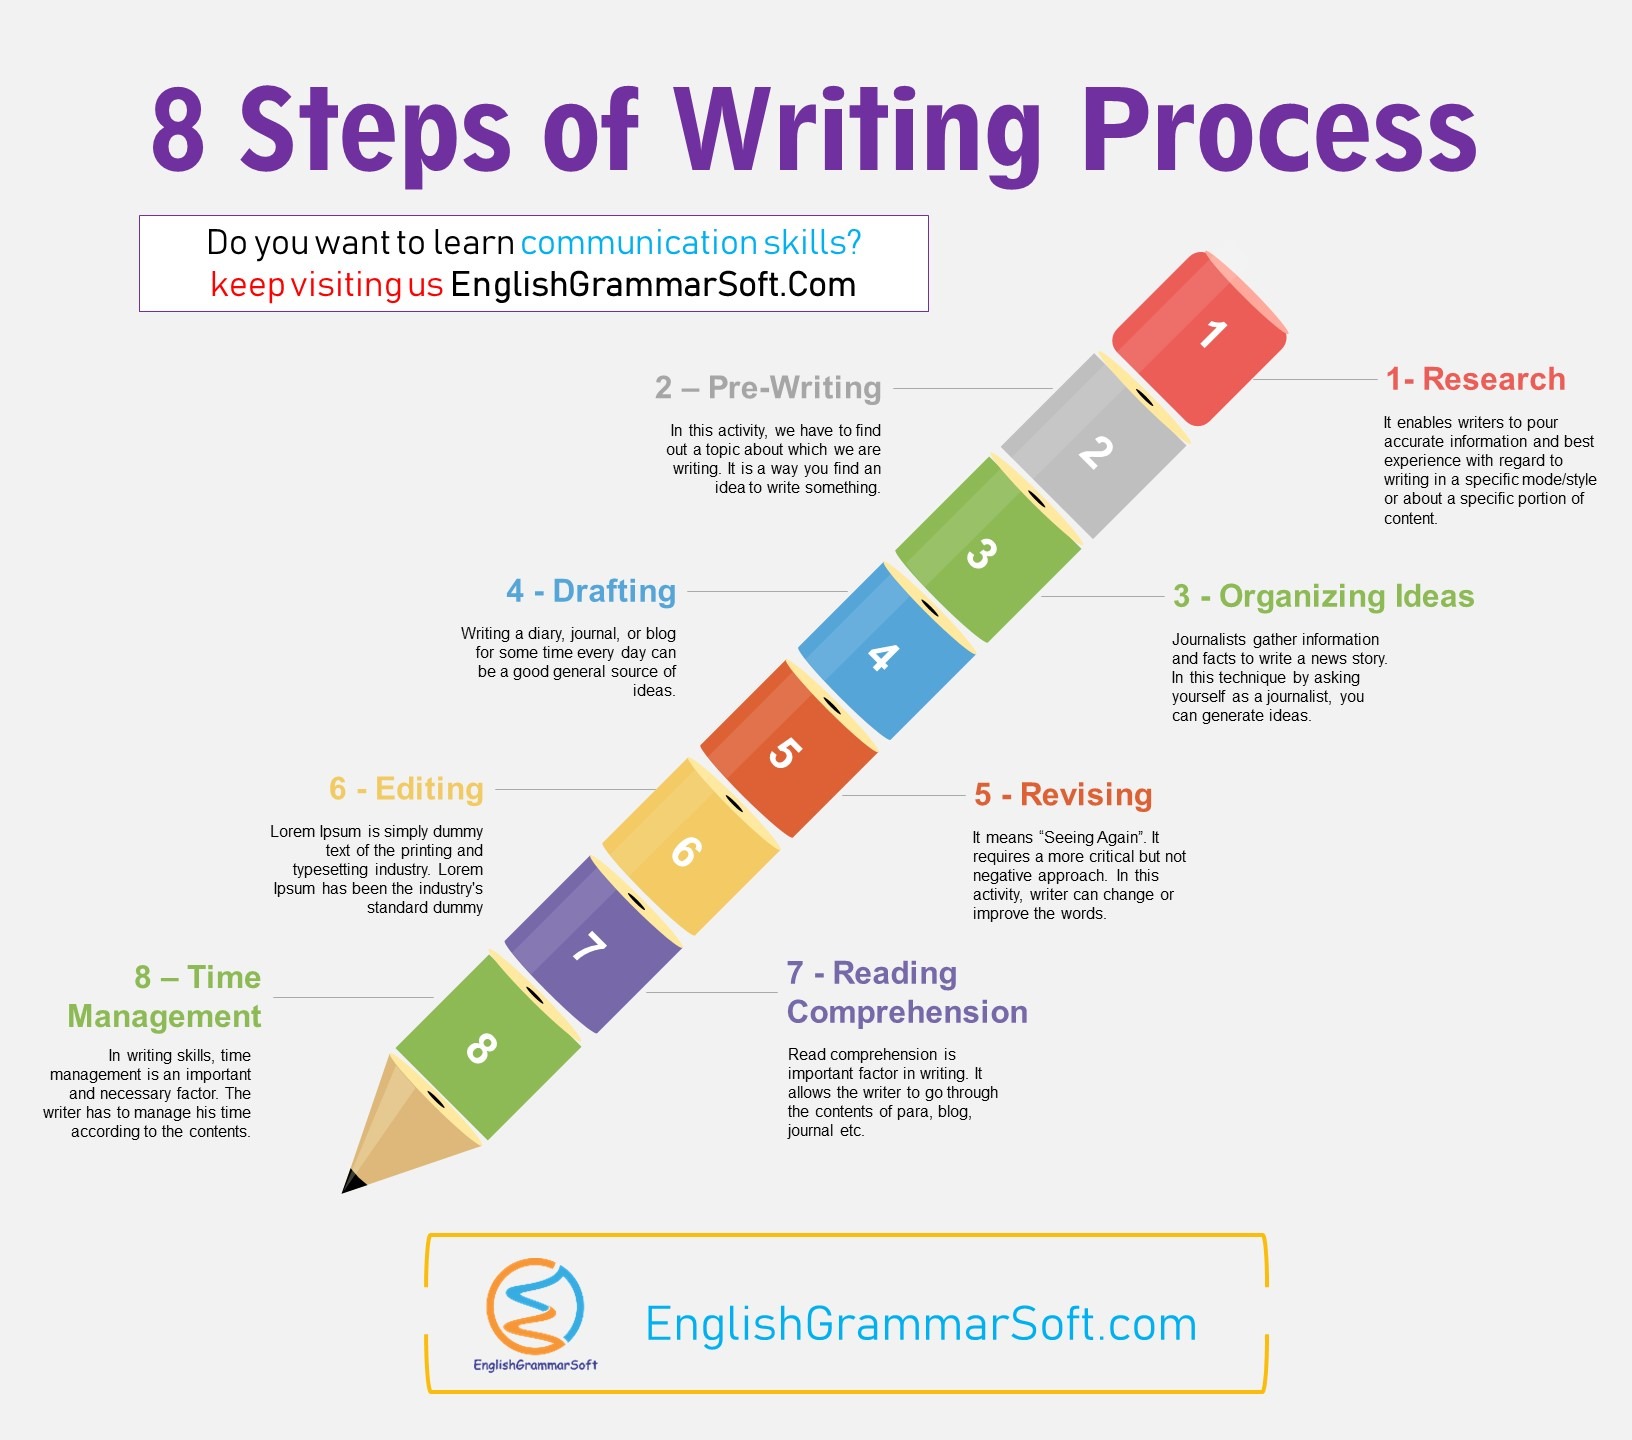 8 steps of writing process